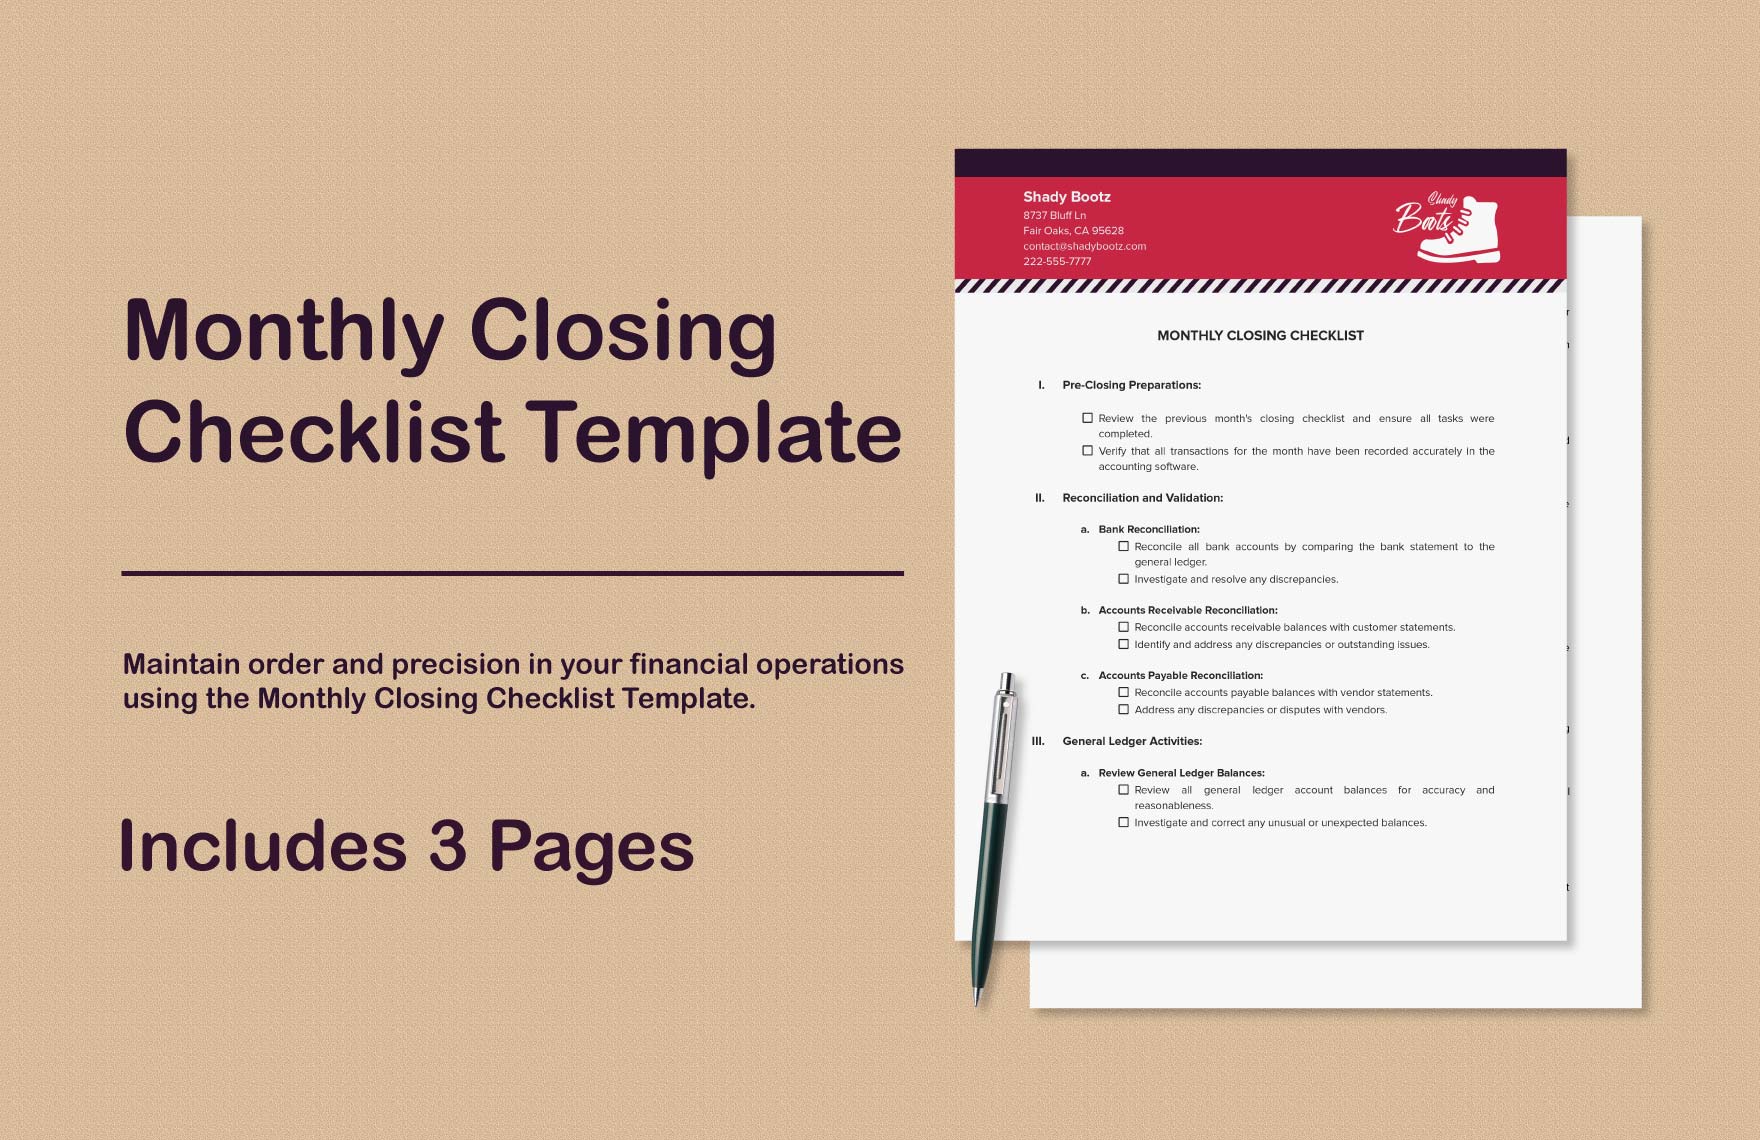  Monthly Closing Checklist Template